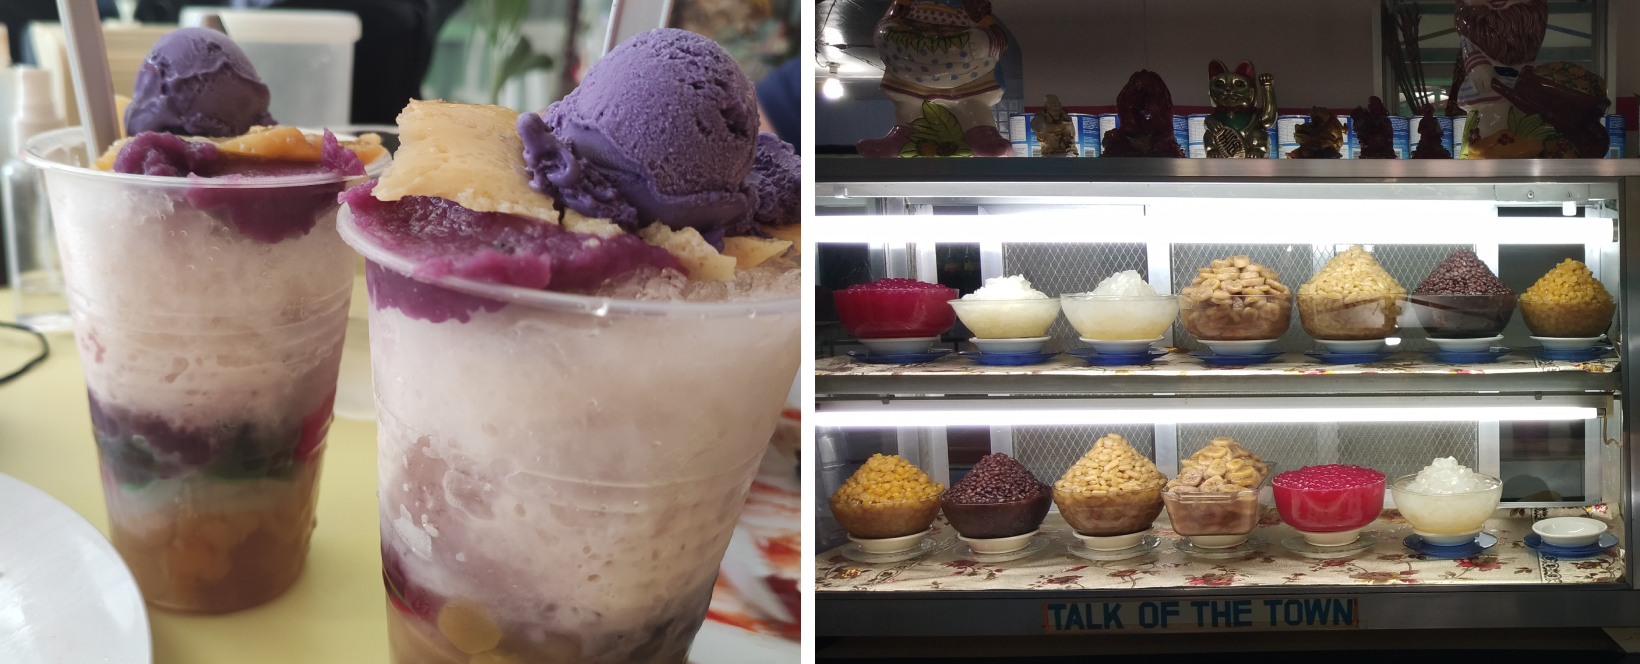 Digman Halo-Halo - close up and toppings